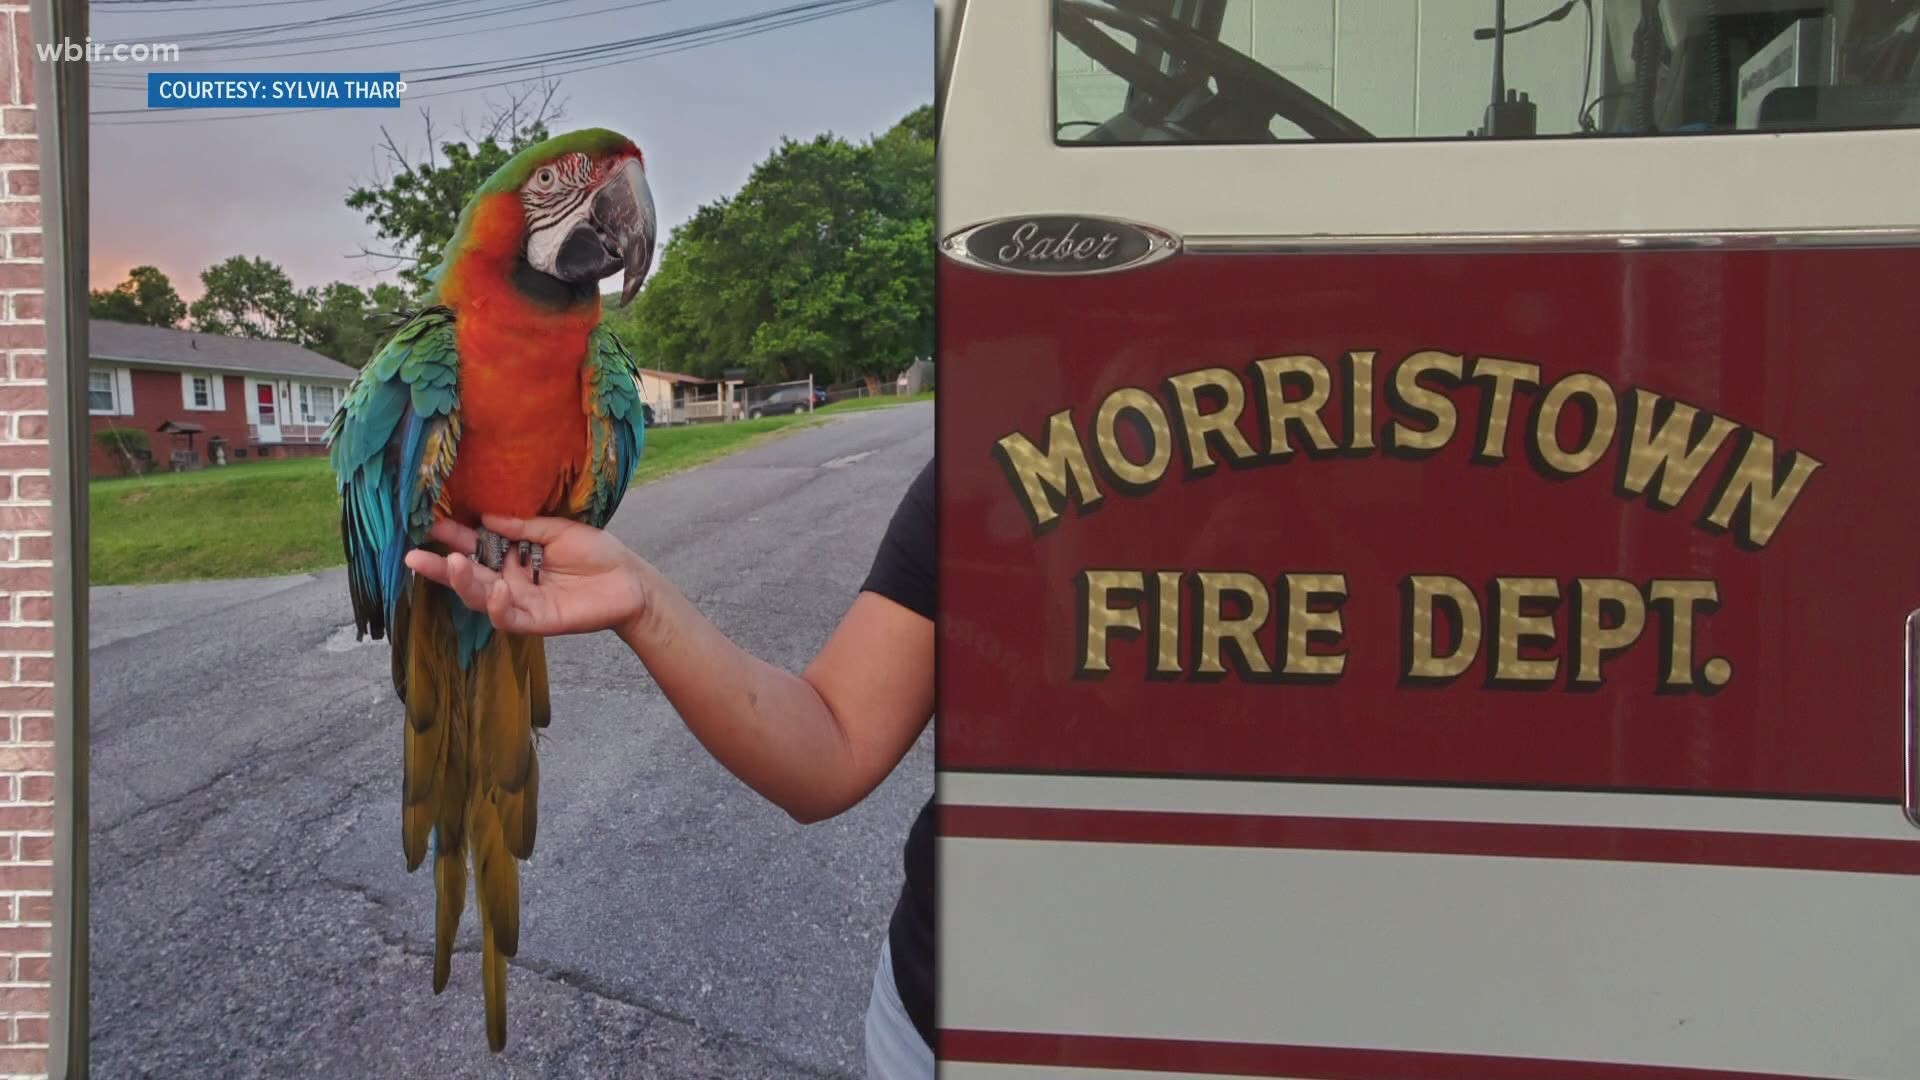 It was an average day at the Morristown Fire Department. That is until firefighters got a call they never expected.